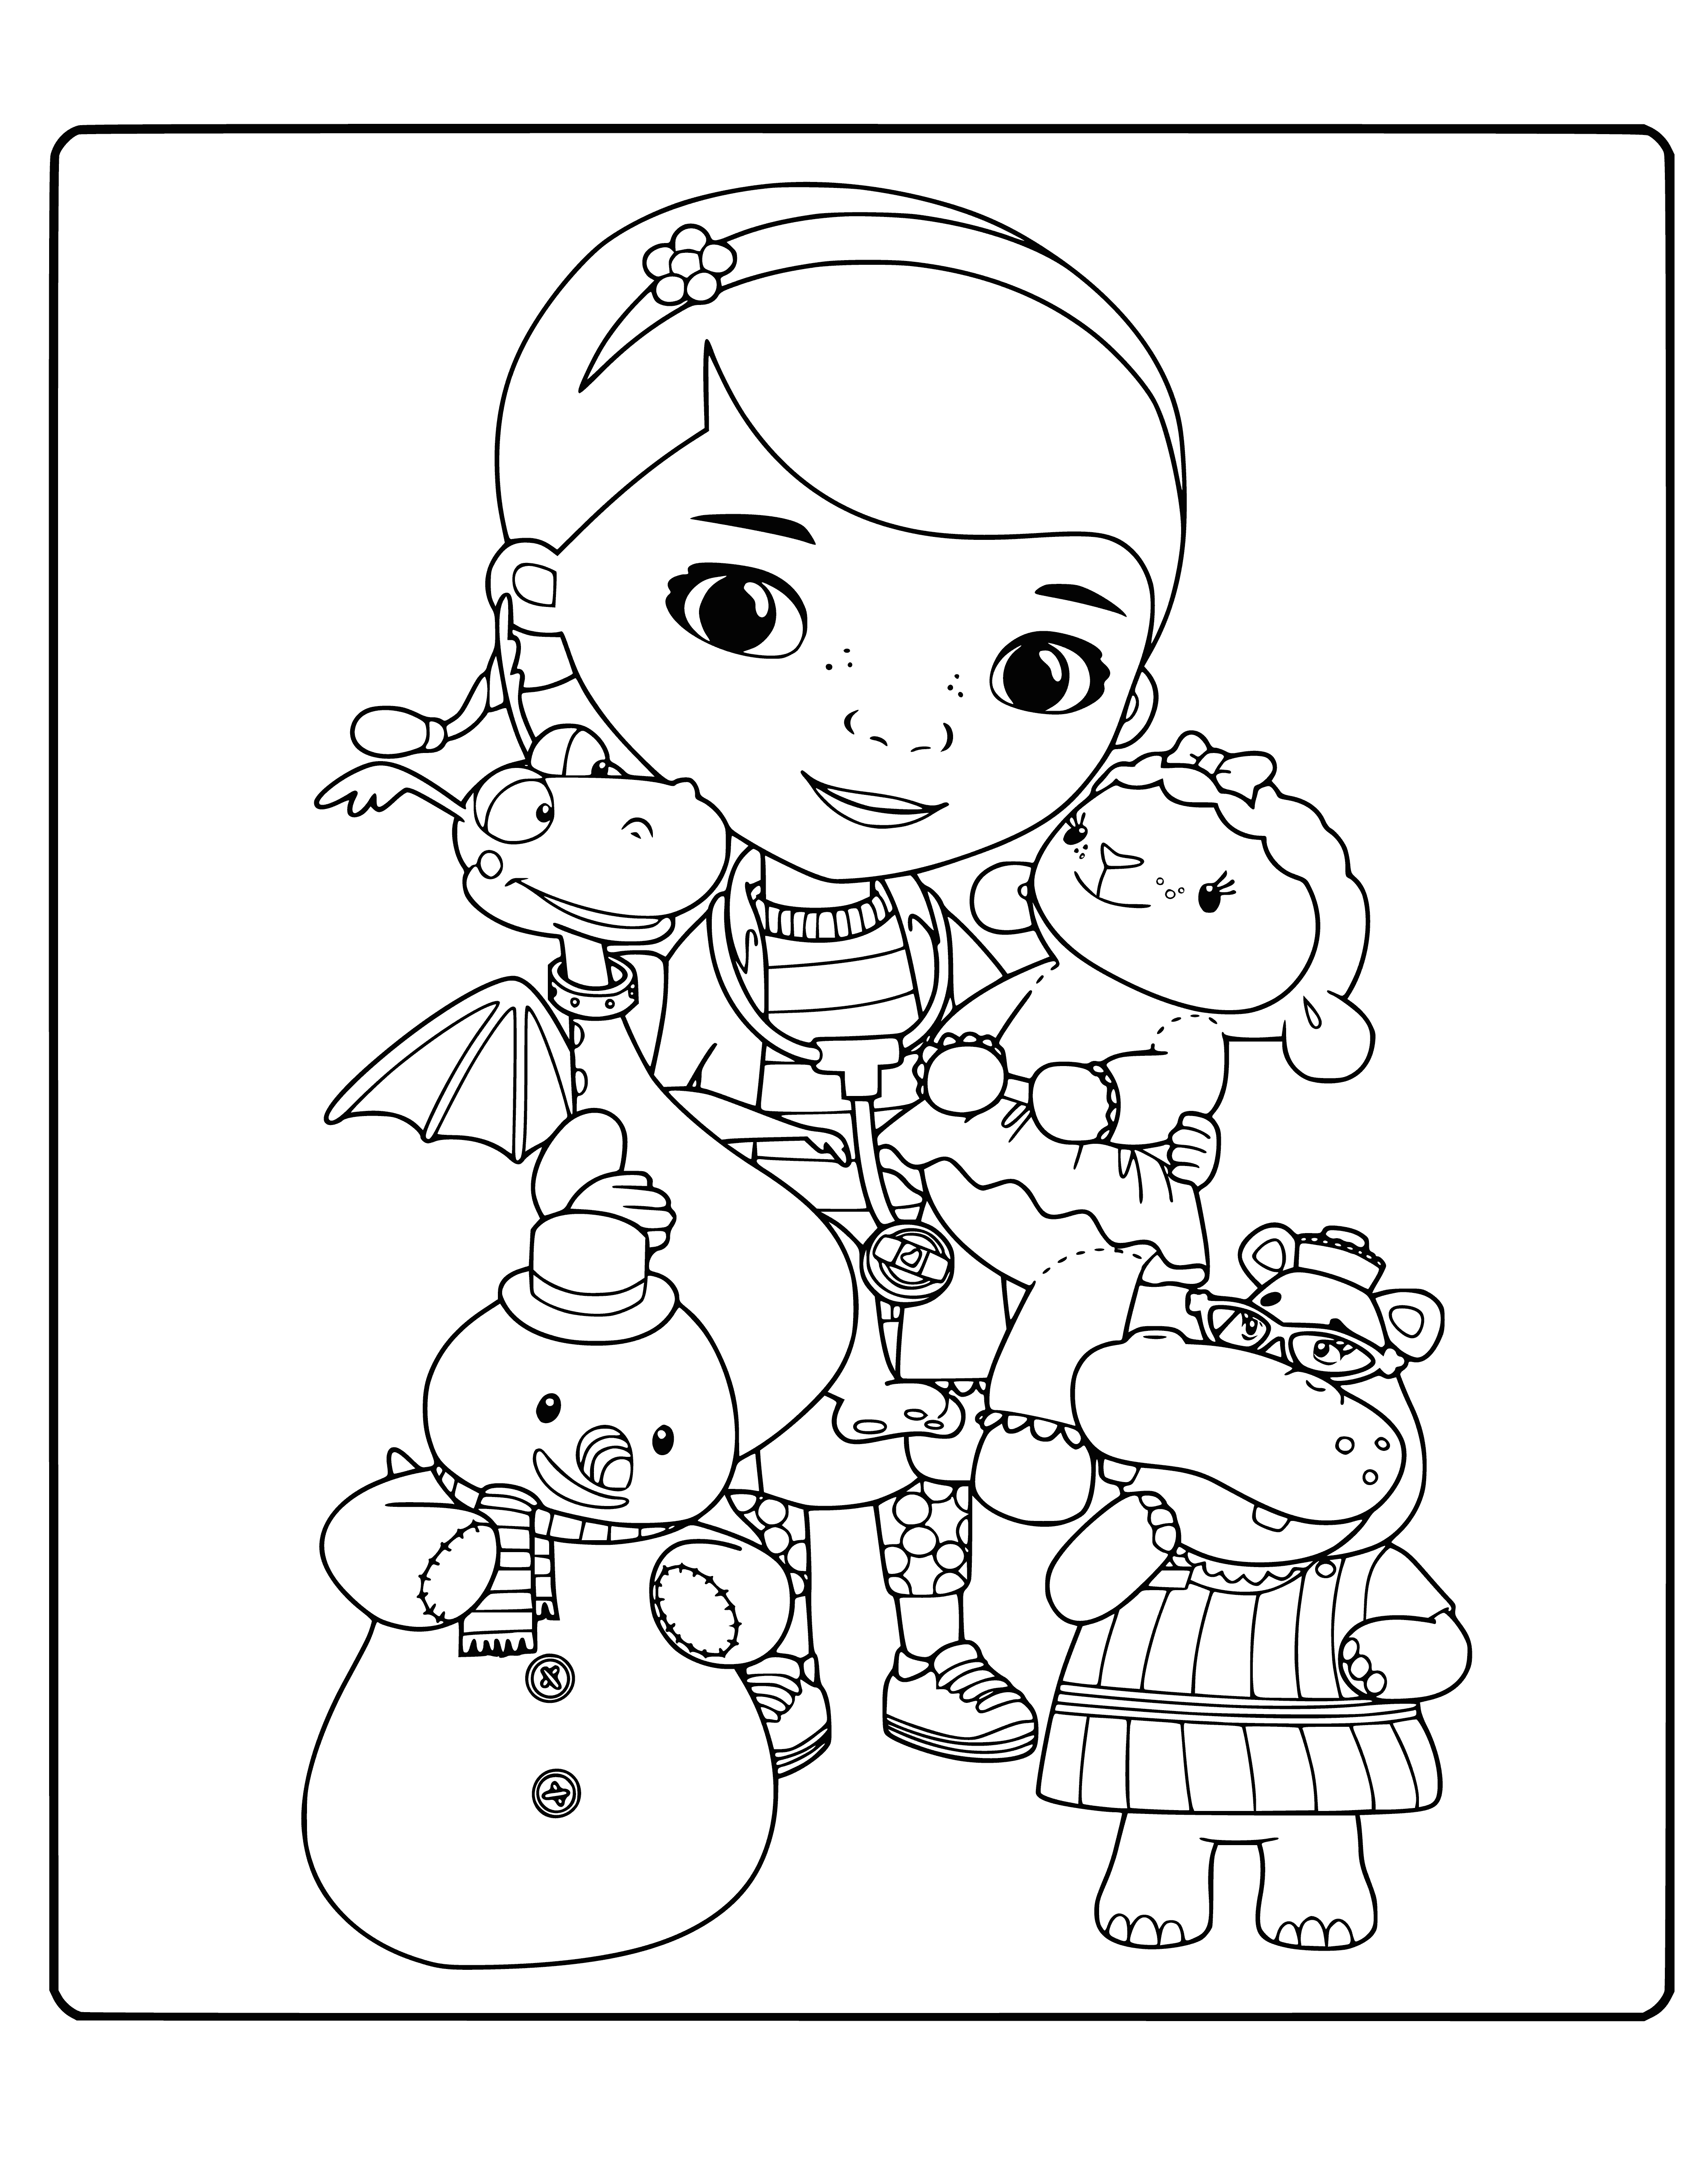 Dottie with friends coloring page